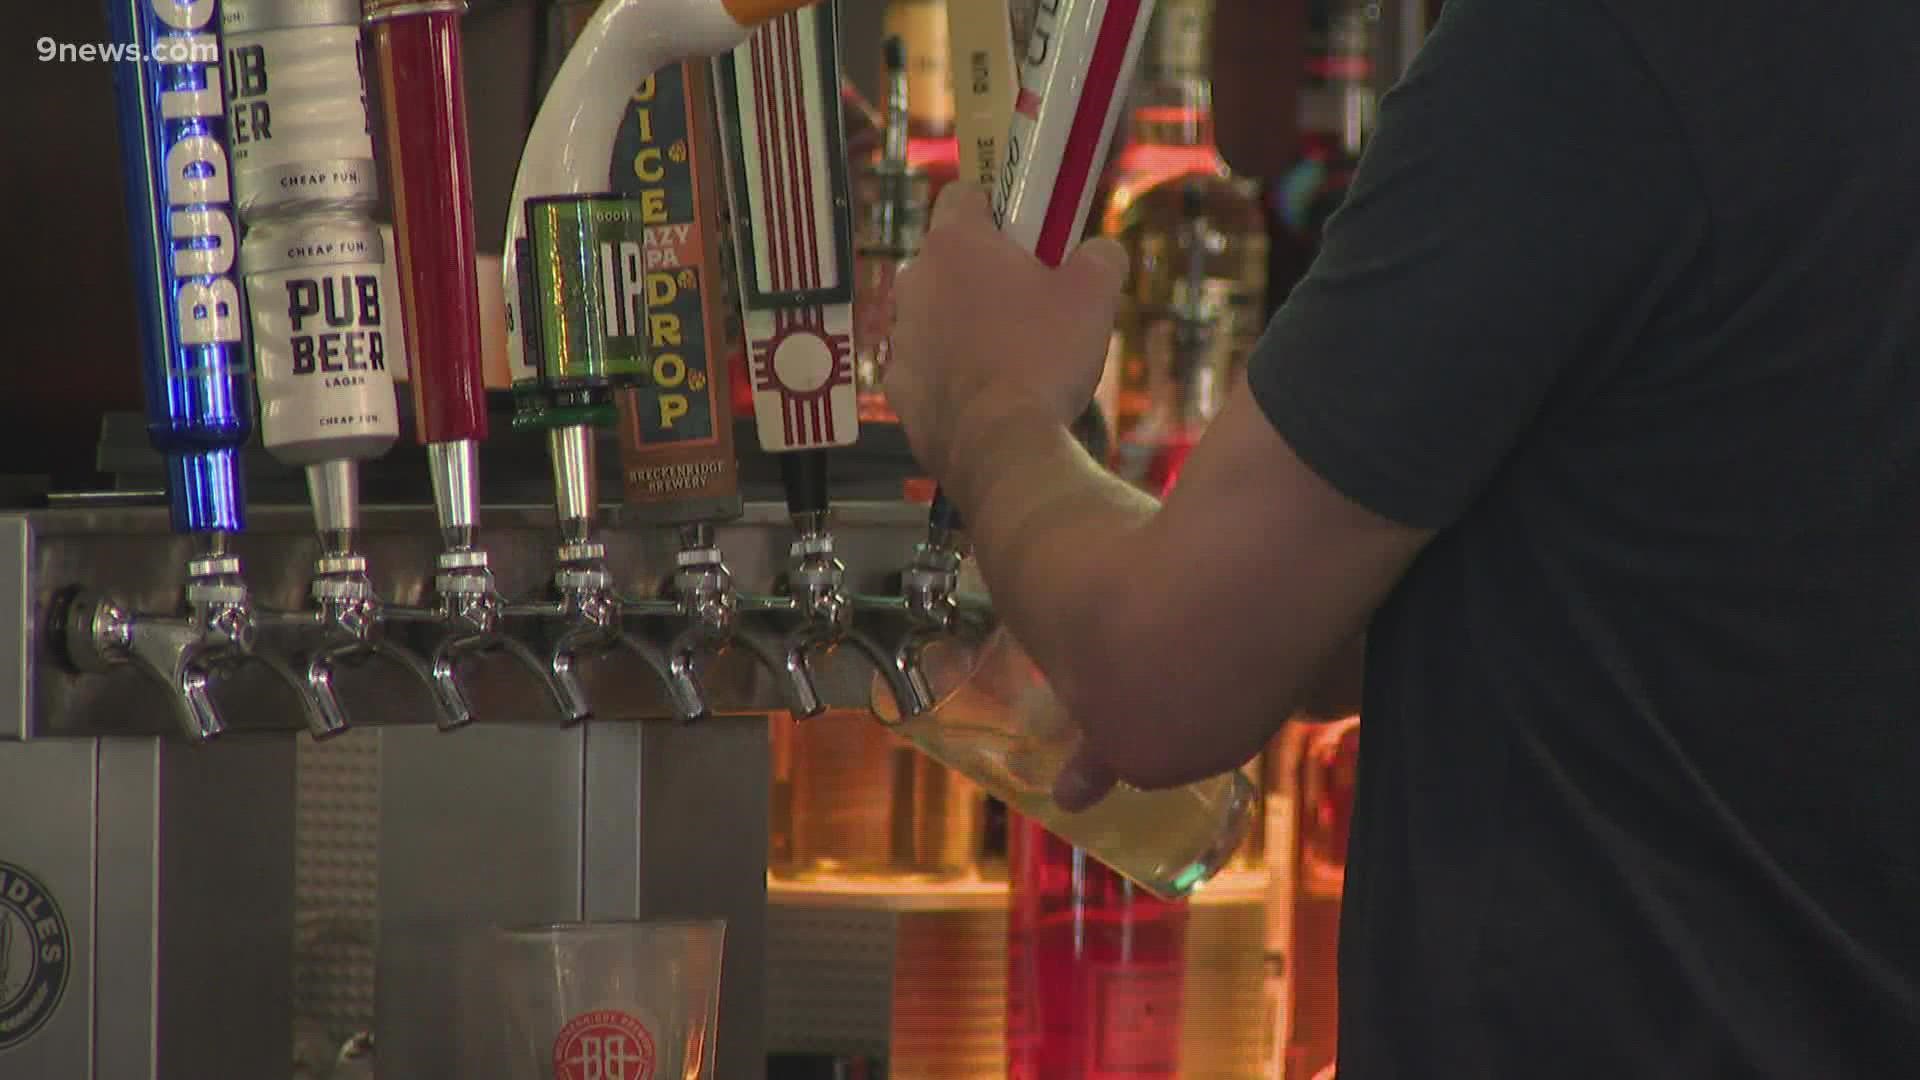 As football fans return to Denver sports bars, owners are still struggling to find bartenders and servers.